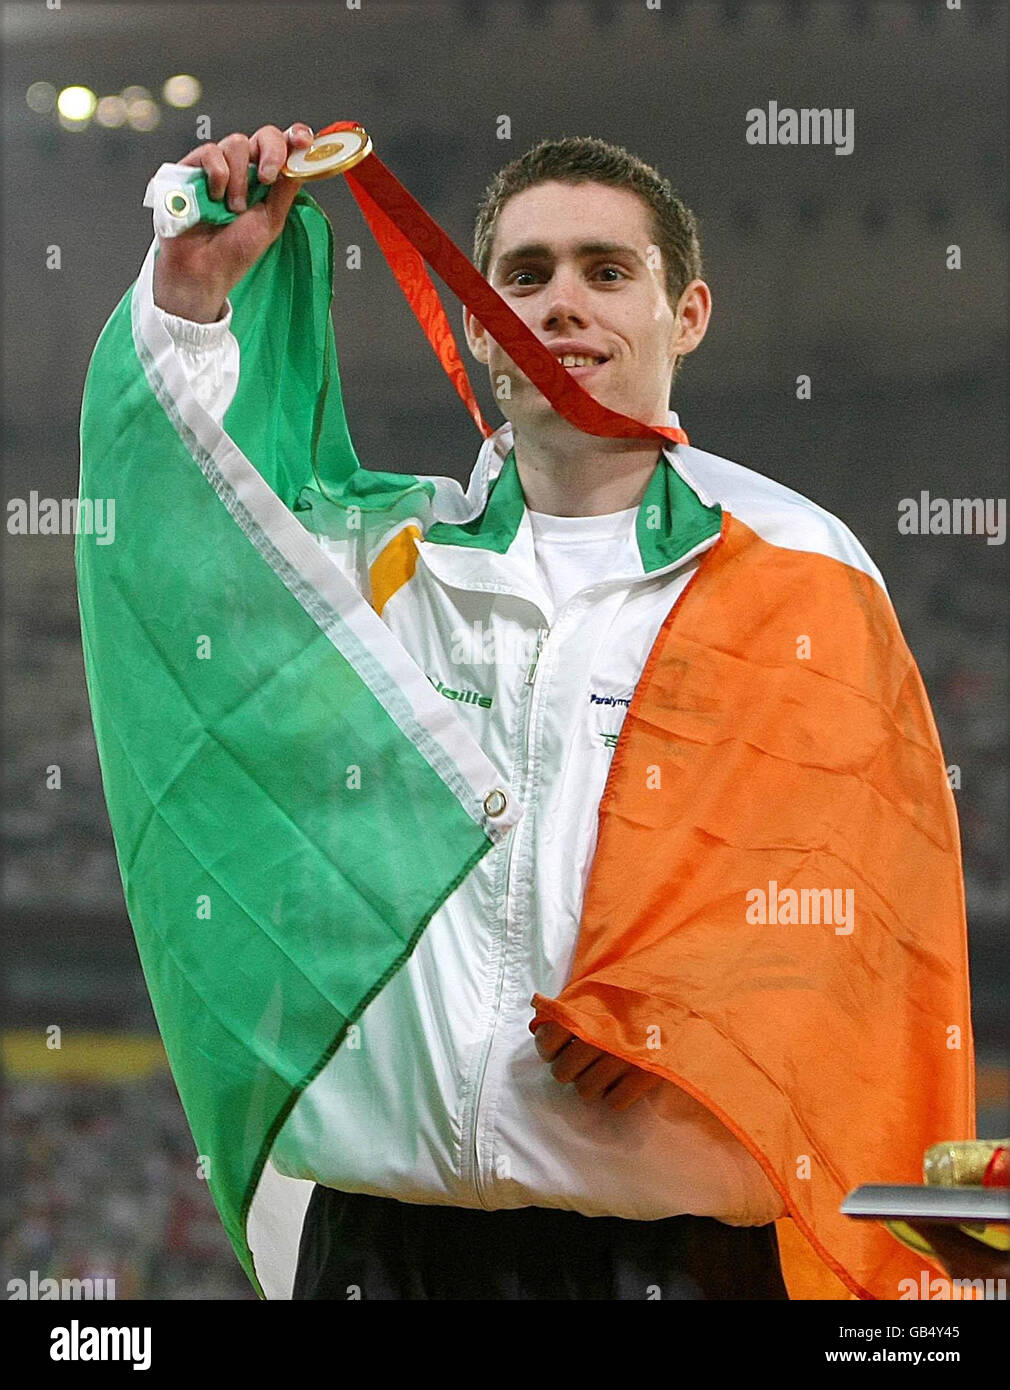 Ireland's Jason Smith who won gold in the men's T13 200M Final in the National Stadium, in Beijing, China. Stock Photo